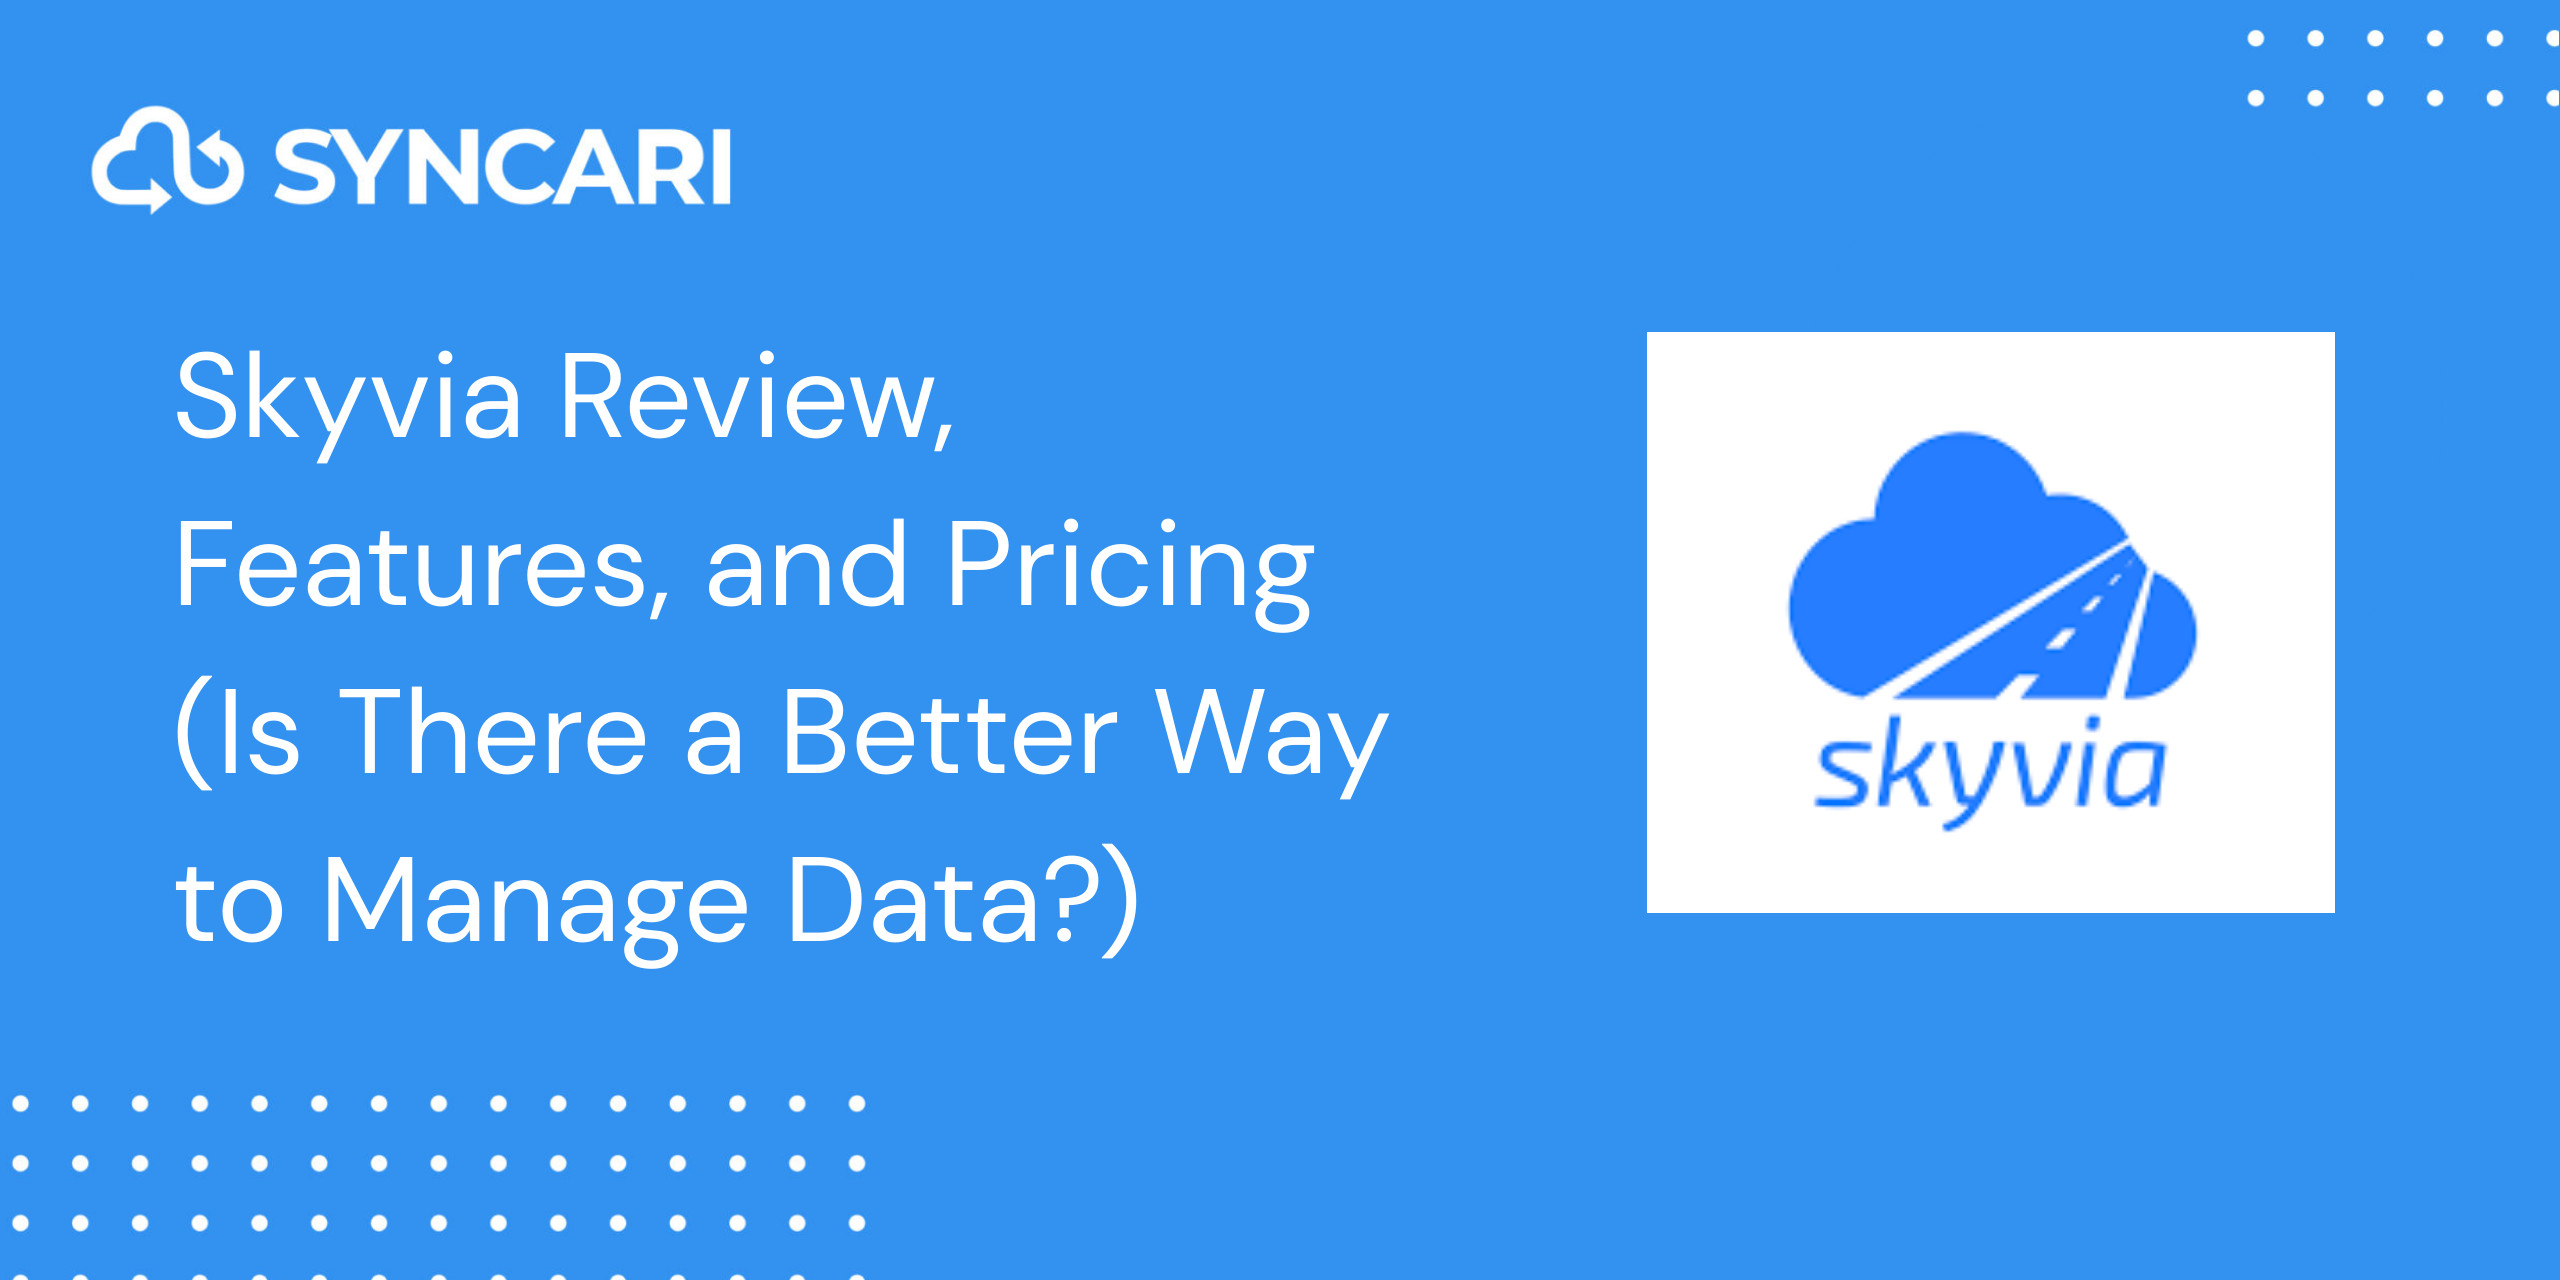 Skyvia Review, Features, and Pricing (Is There a Better Way to Manage Data?) Blog Image Featuring Logo